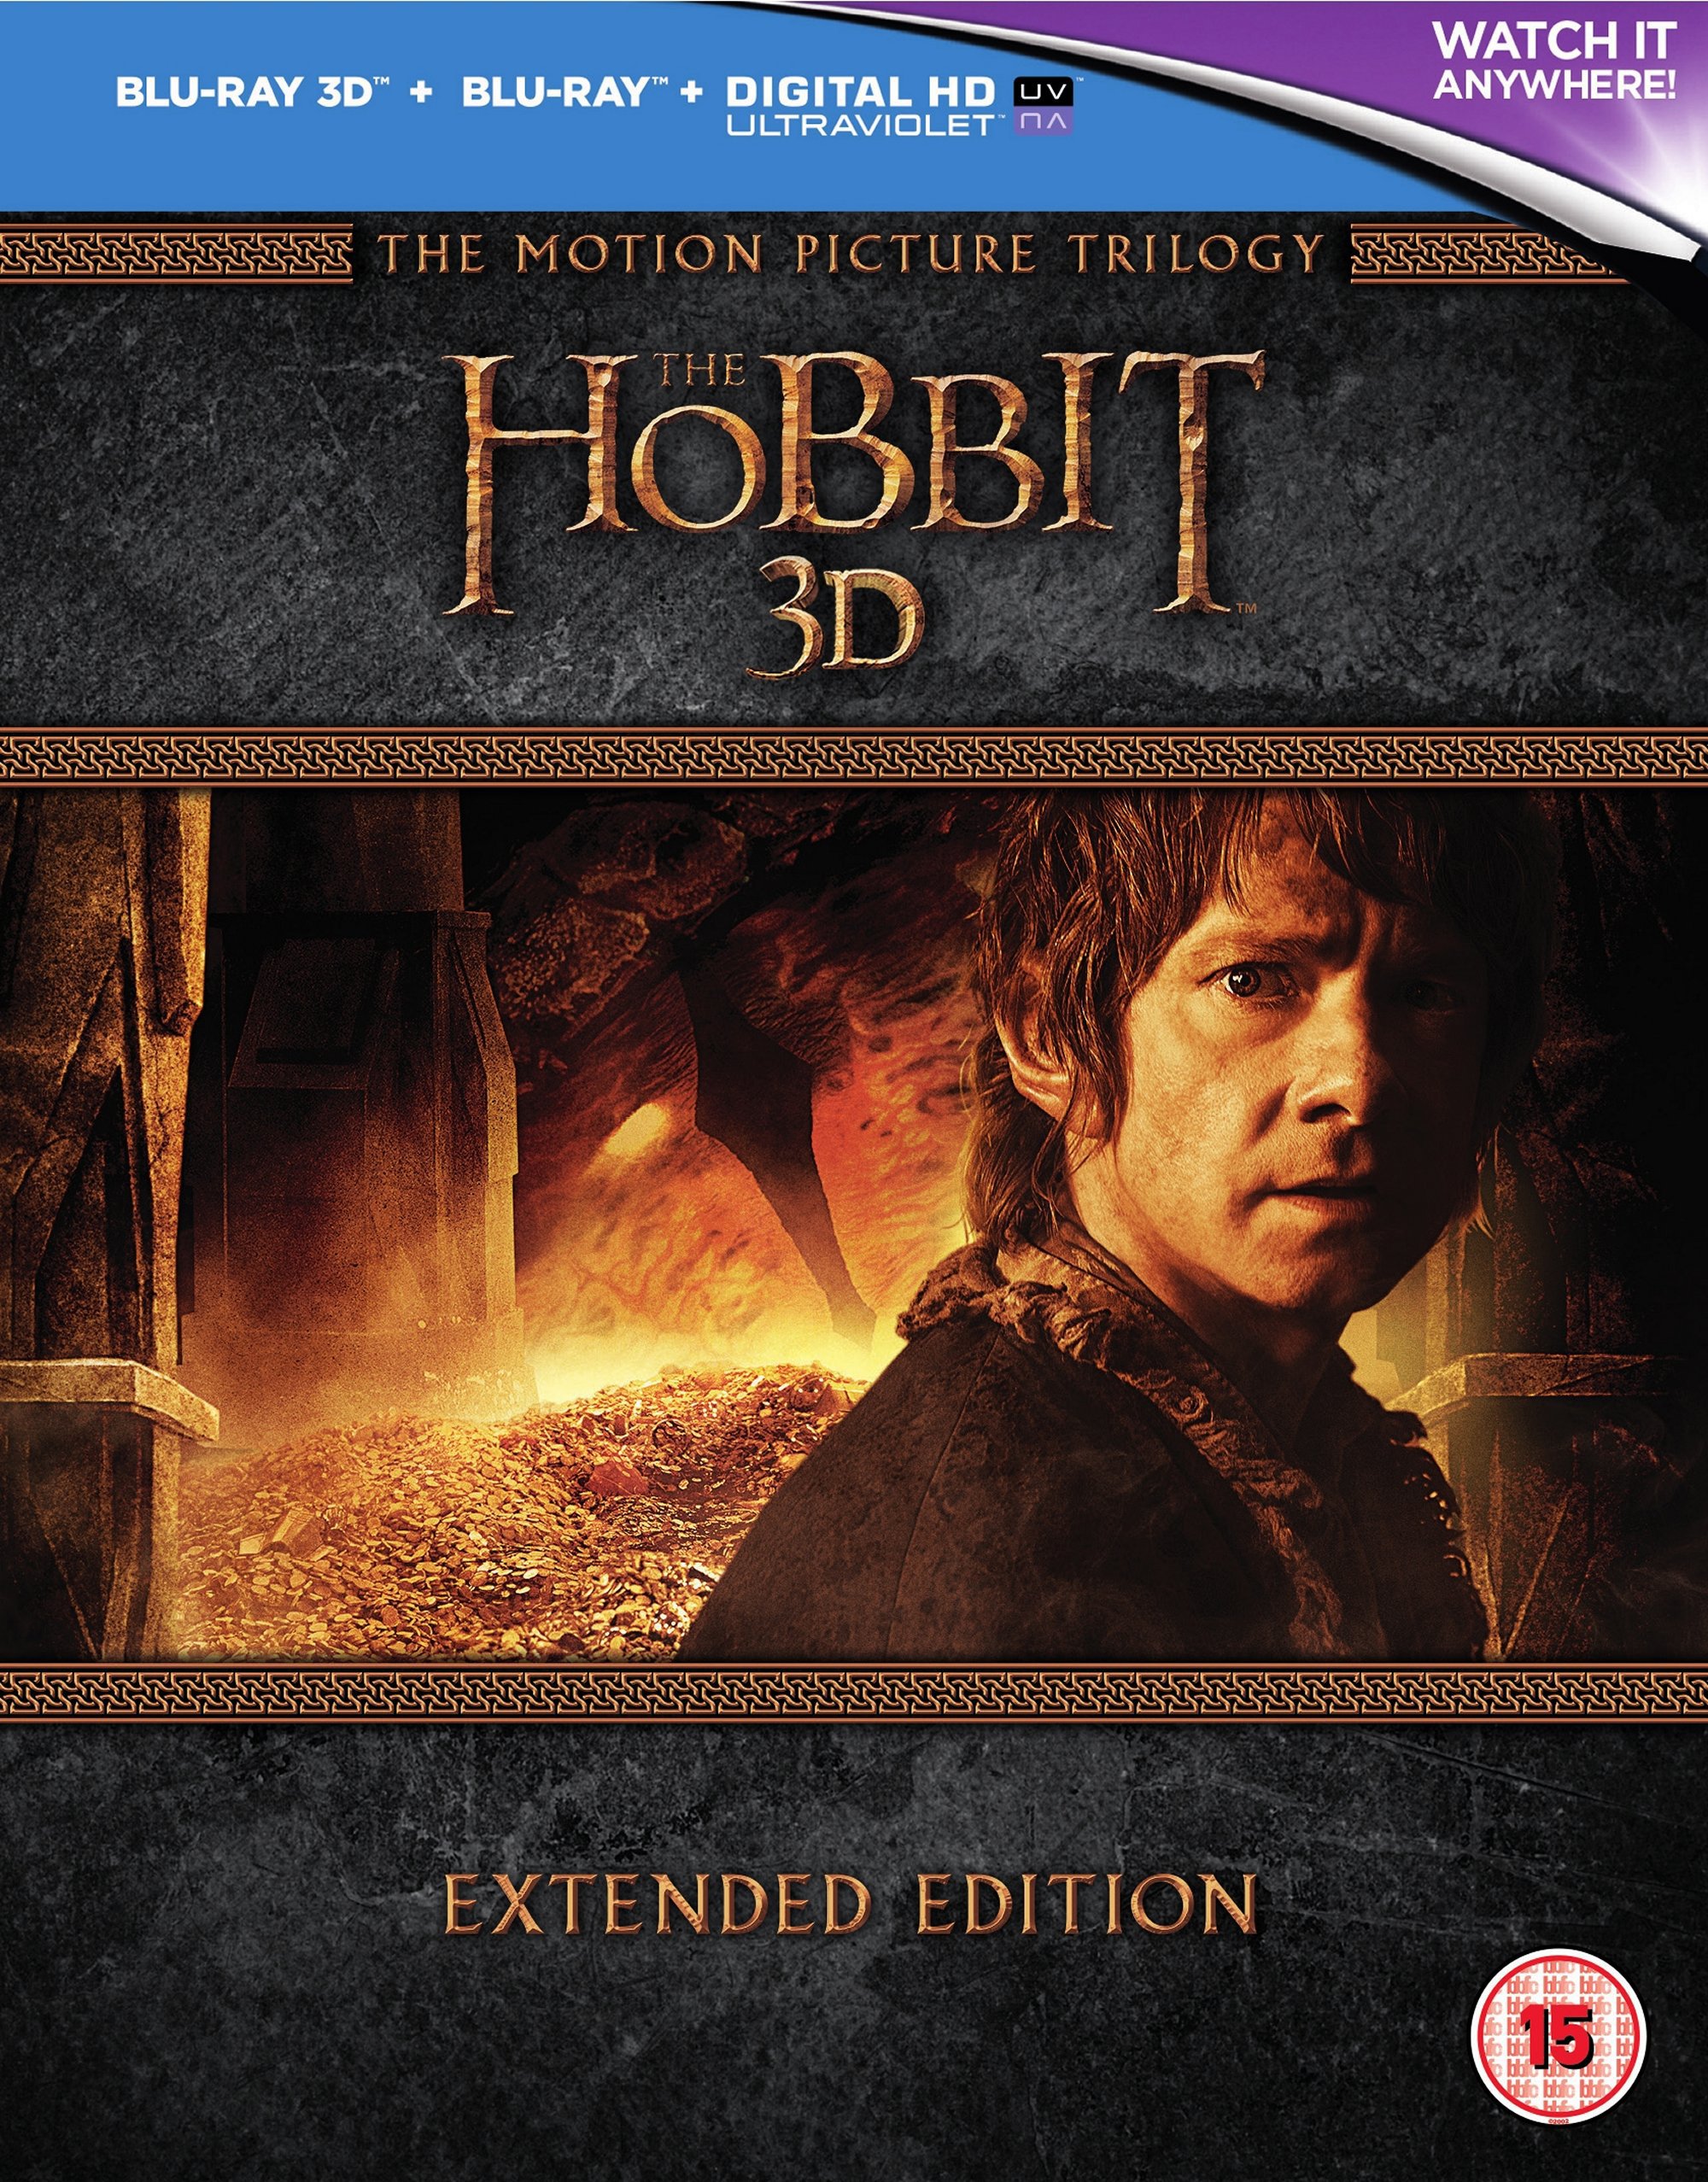 the-hobbit-trilogy-extended-edition-3d-movie-purchase-or-watch-onli